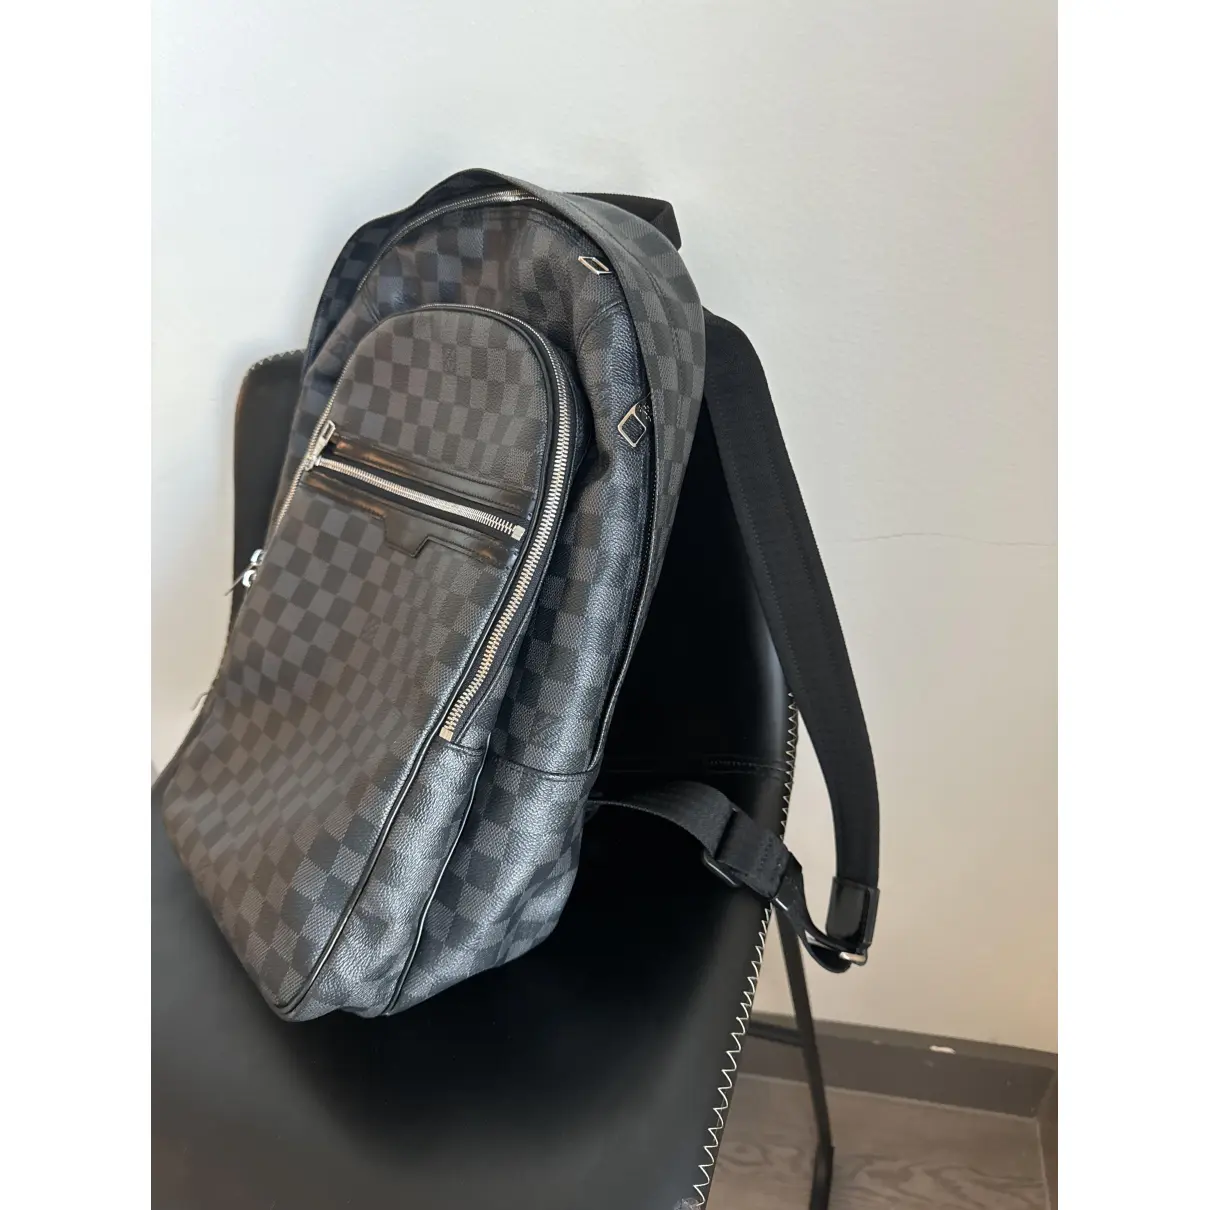 Buy Louis Vuitton Michael Backpack leather travel bag online